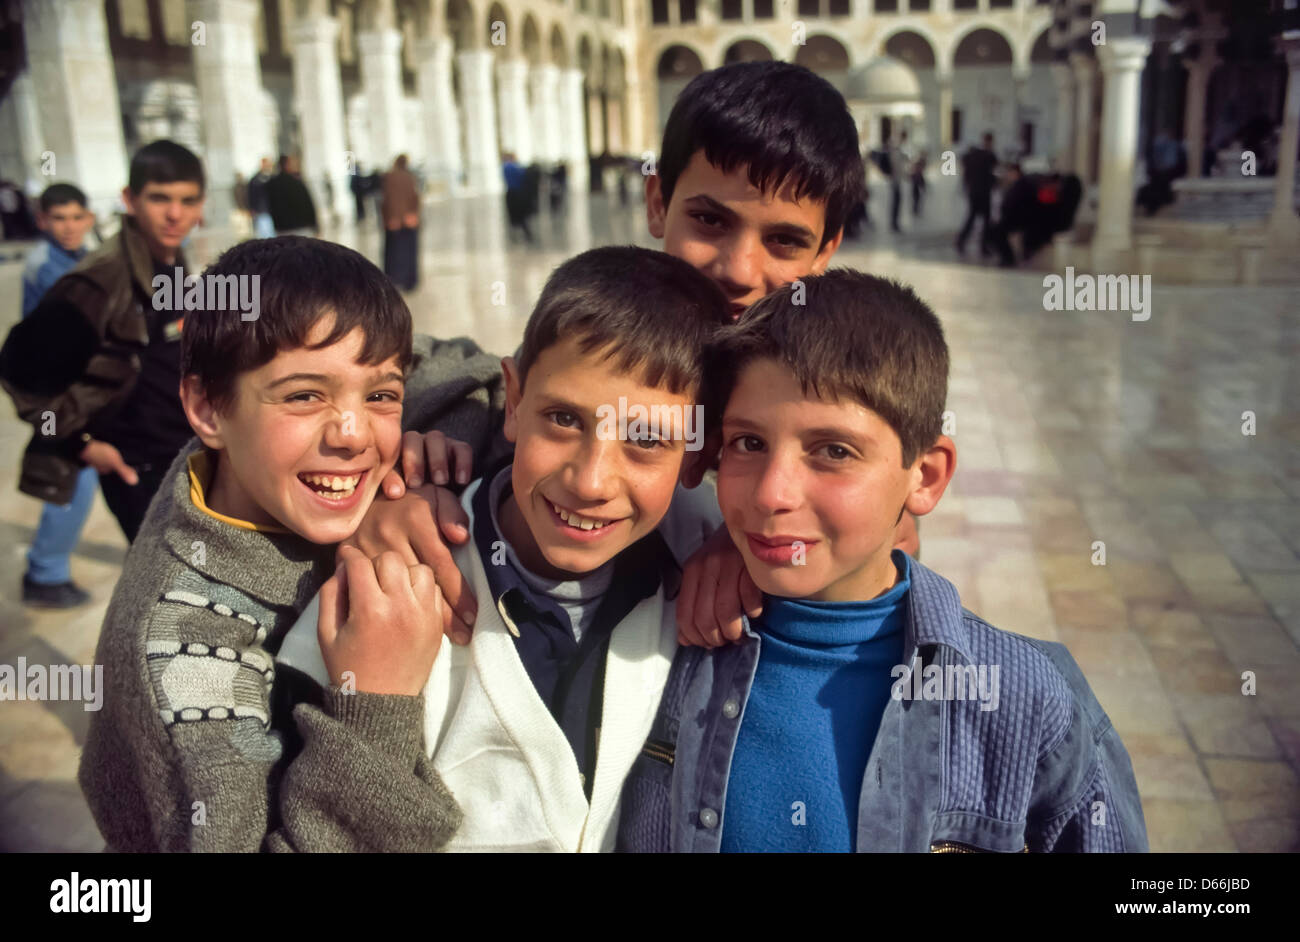 Children in the Courtyard of the omayad Mosque Stock Photo